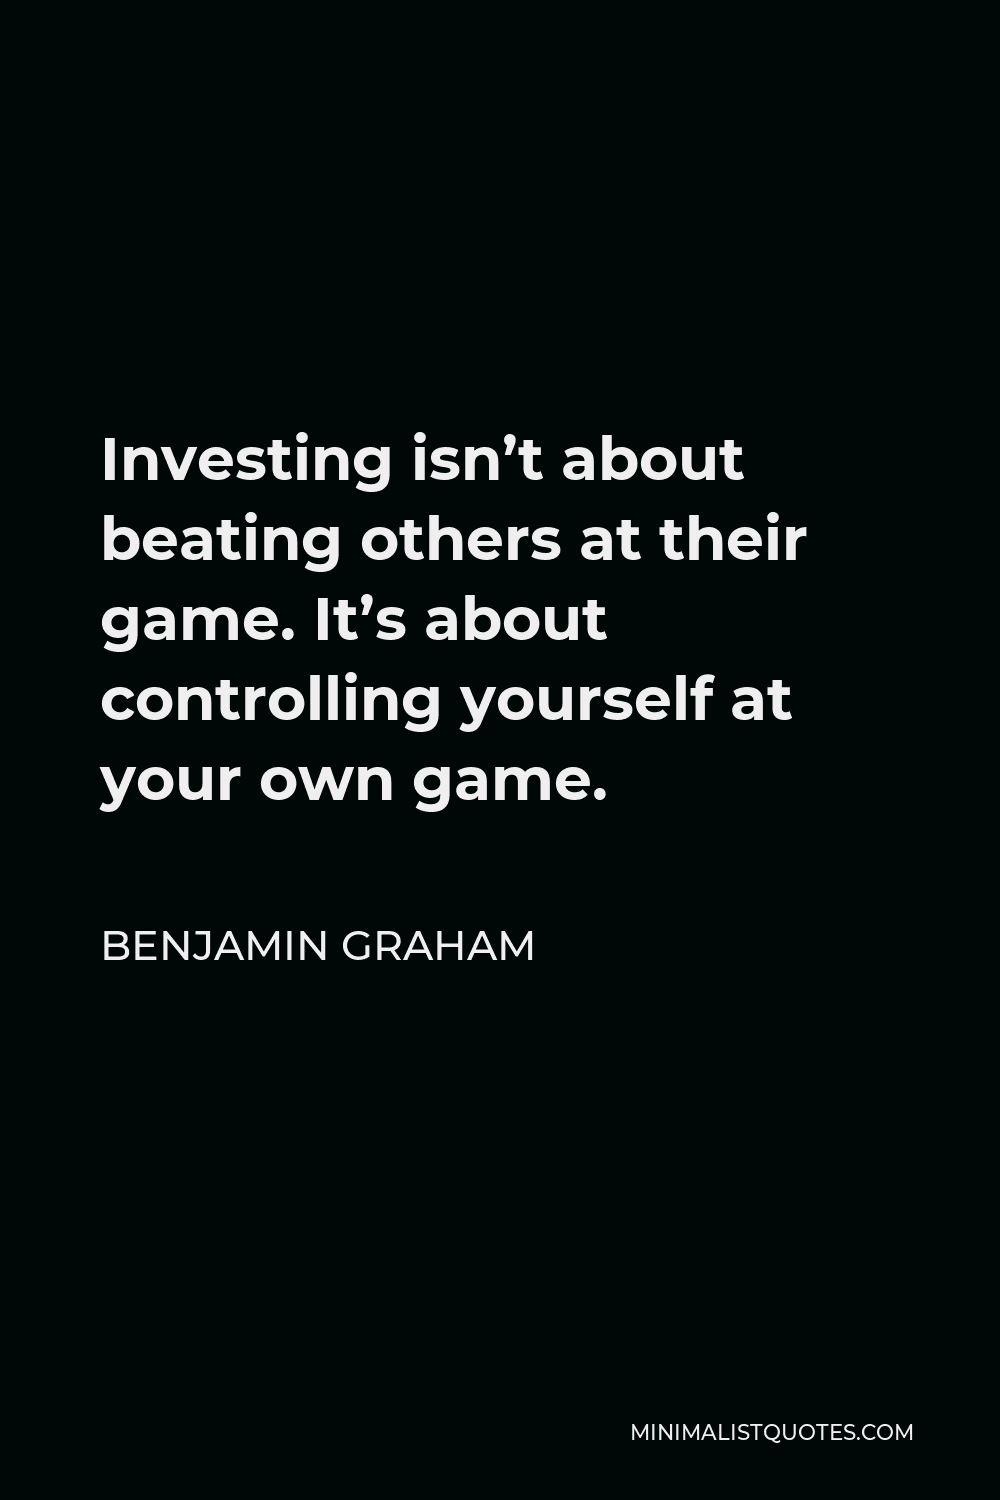 Benjamin Graham Quote - Investing isn’t about beating others at their game. It’s about controlling yourself at your own game.